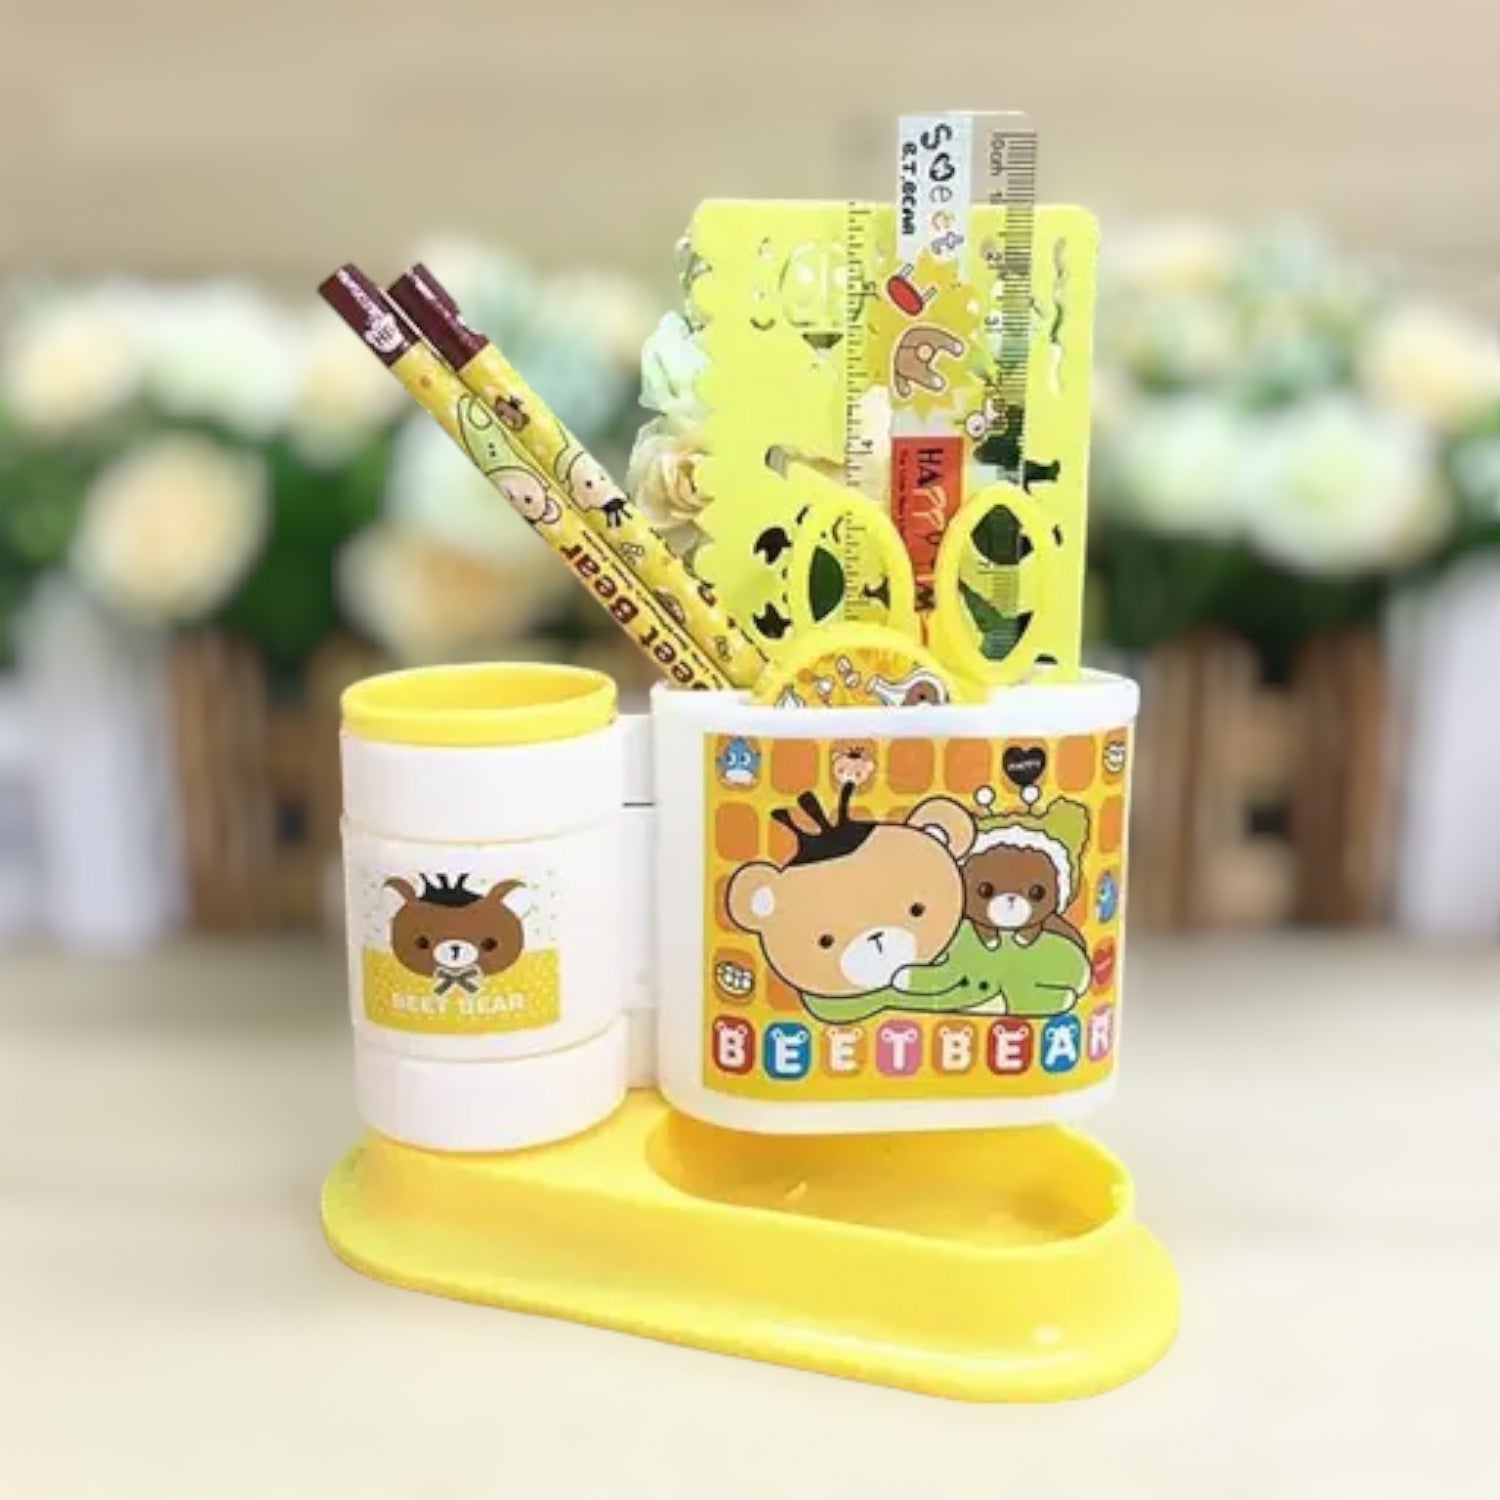 Pencil Holder | Stationery Kit with Pencils / Scale / Stencil Scale - for Kids, Children, Student, Birthday Gift & Return Gifts - Apkamart 